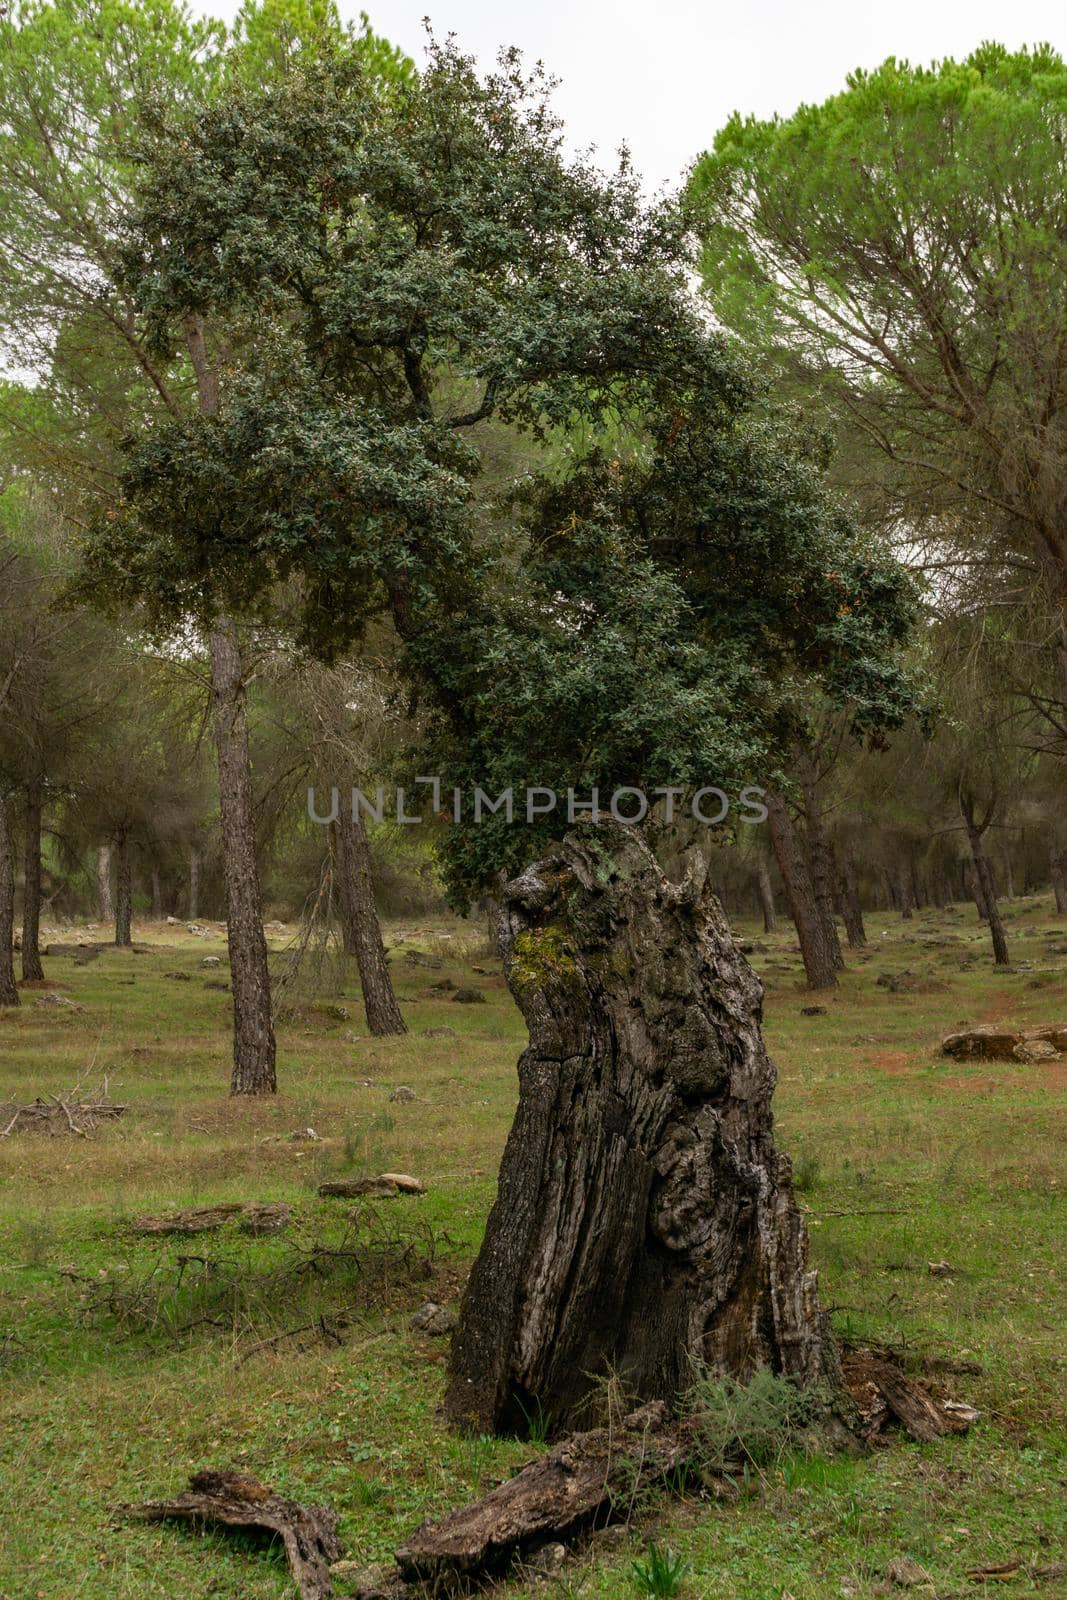 holm oak or Quercus ilex in the foreground with moss on the trunk forest colors